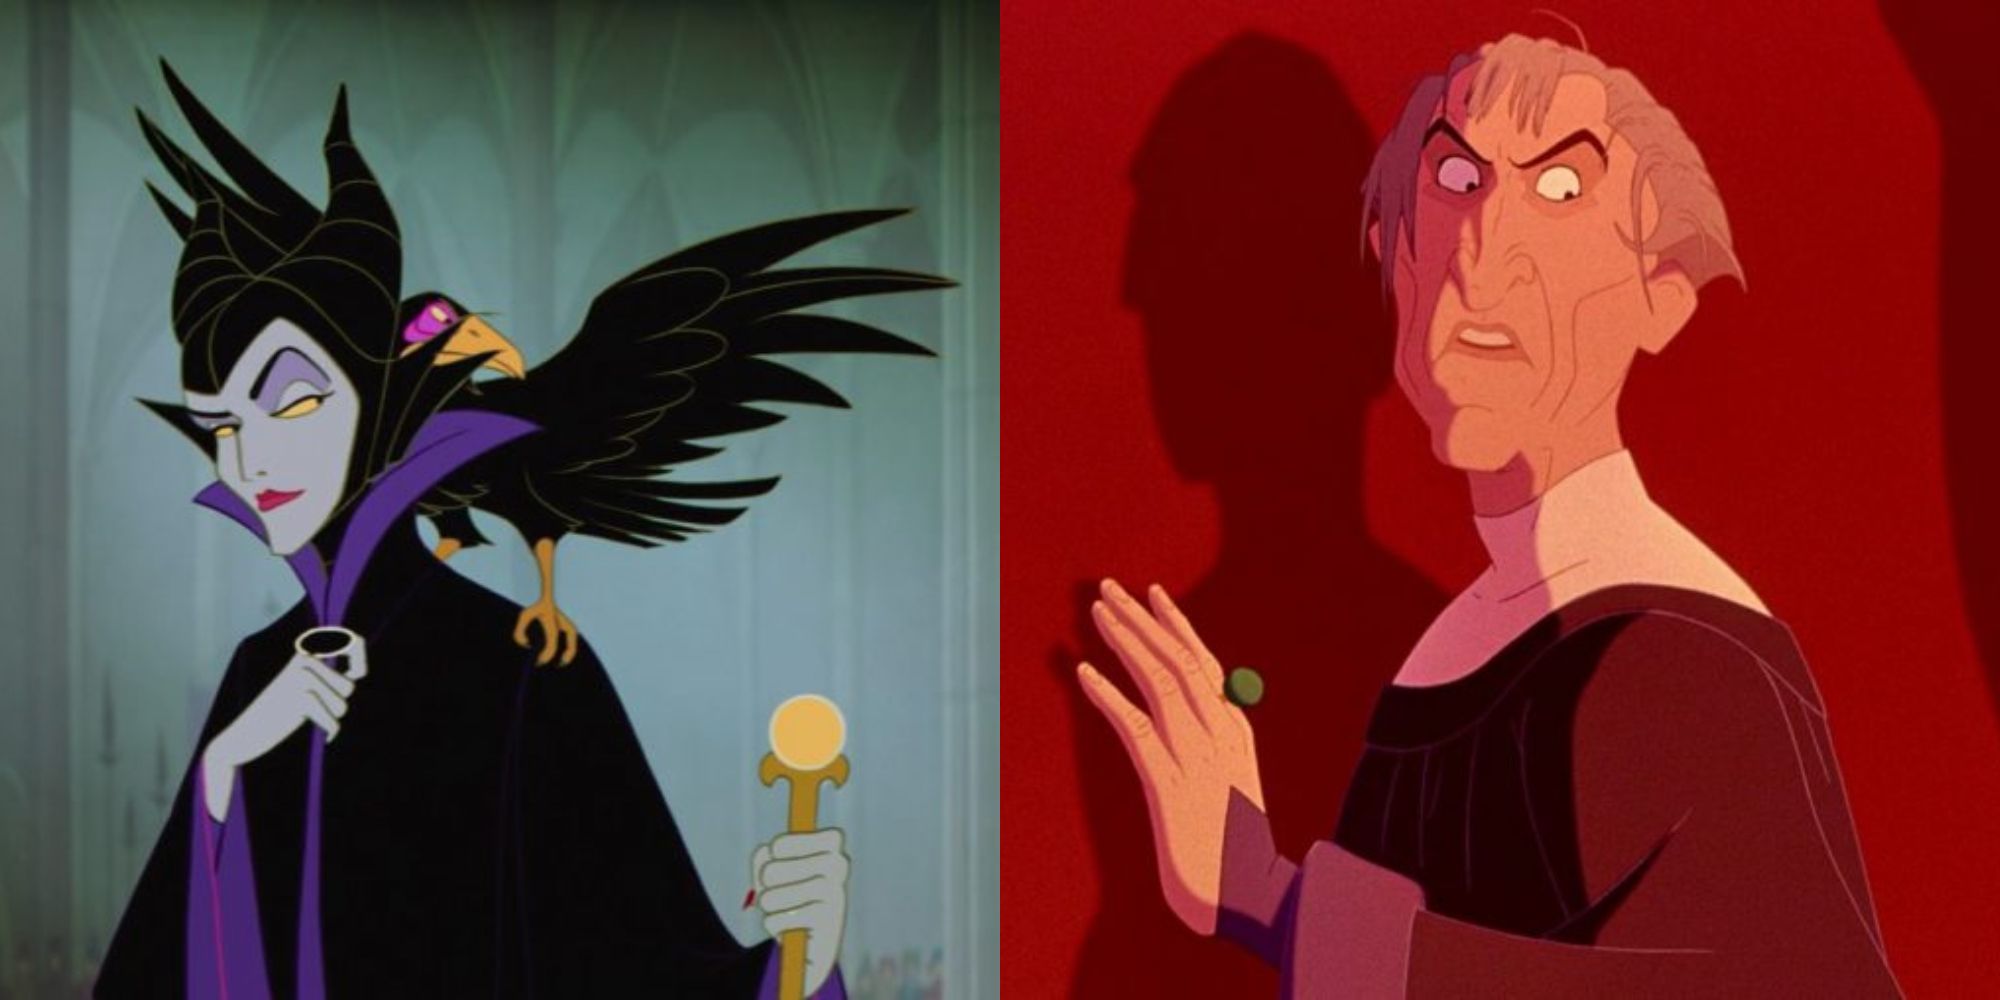 Split image showing Maleficent in Sleeping Beauty and Frollo in The Hunchback of Notre Dame.